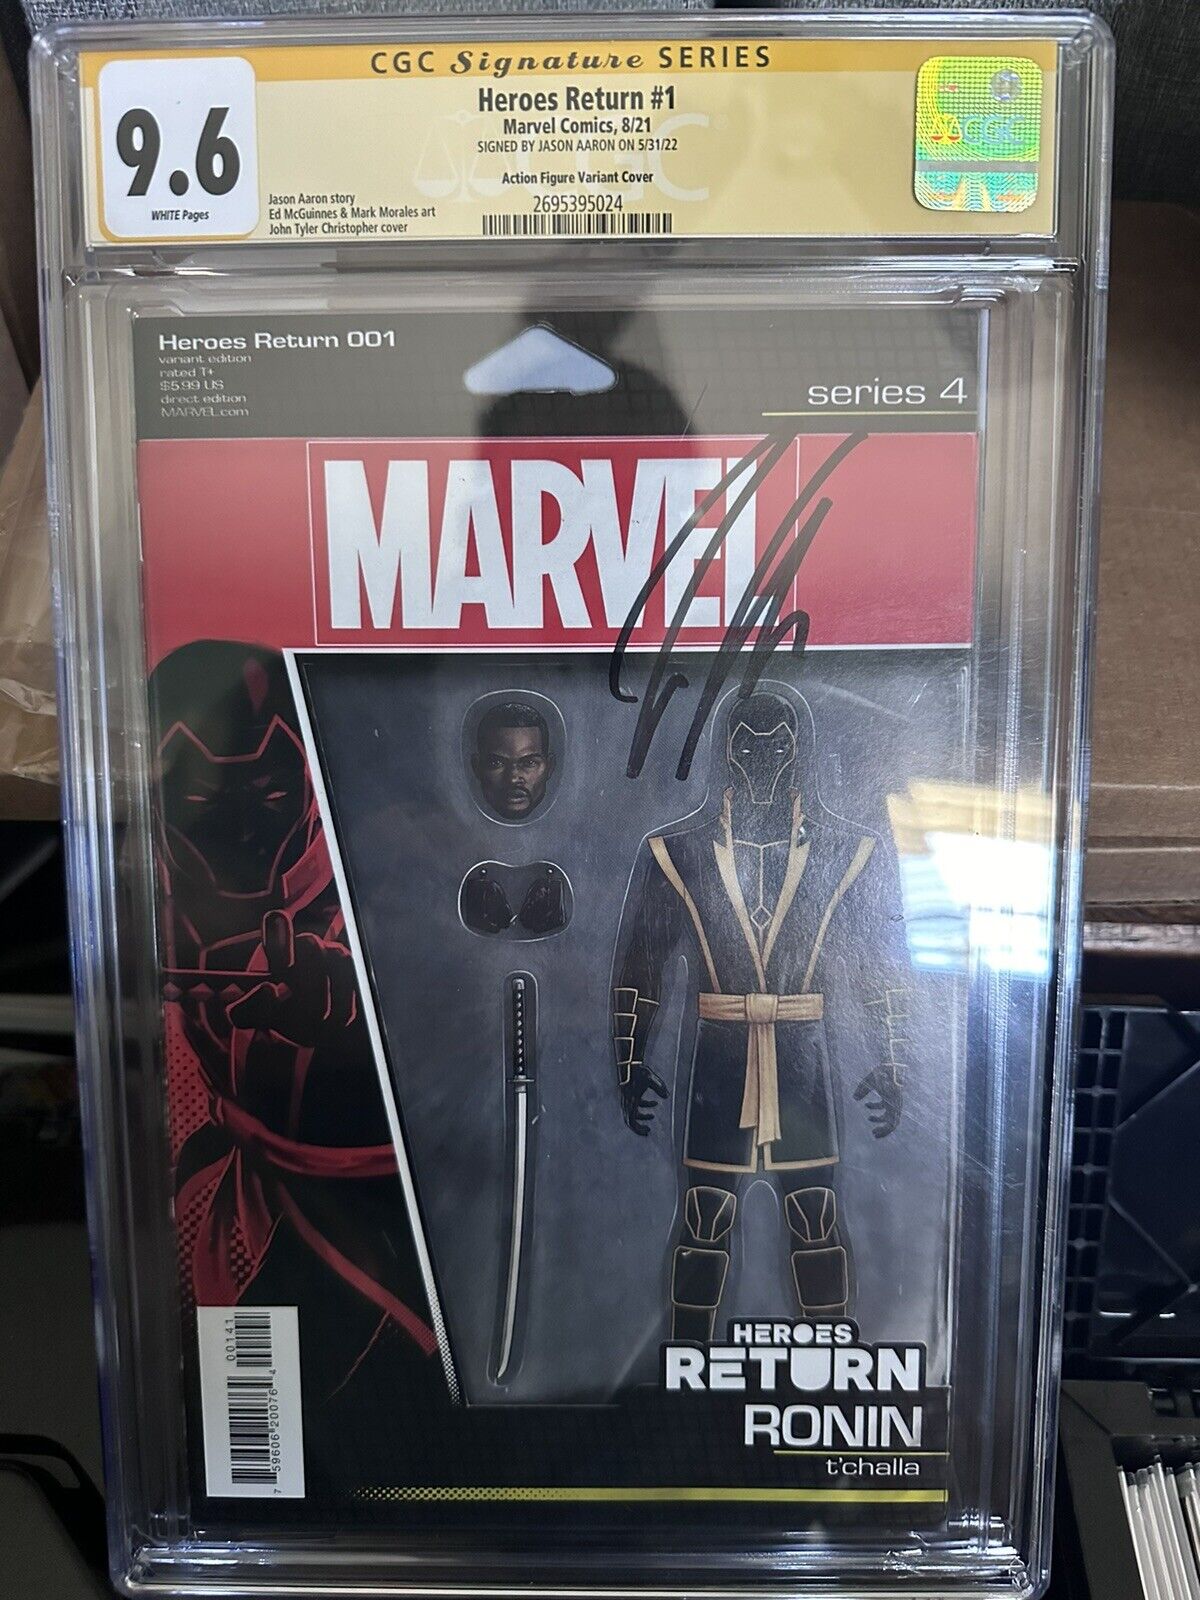 Heroes Return #1 CGC 9.6 Action Figure Variant Signed By Jason Aaron